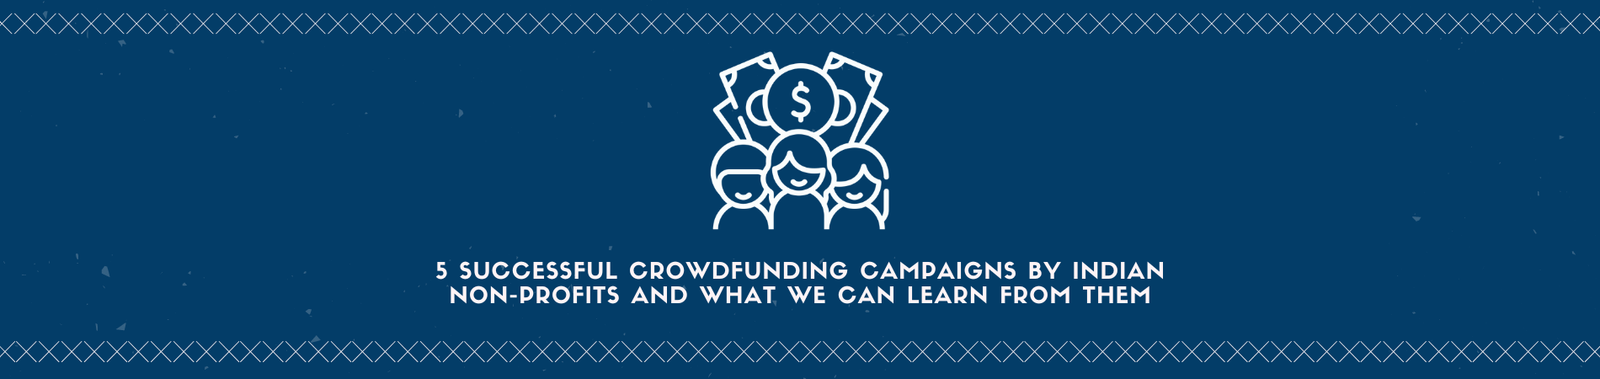 5 Successful Crowdfunding Campaigns by Indian Non-Profits and What We Can Learn from Them